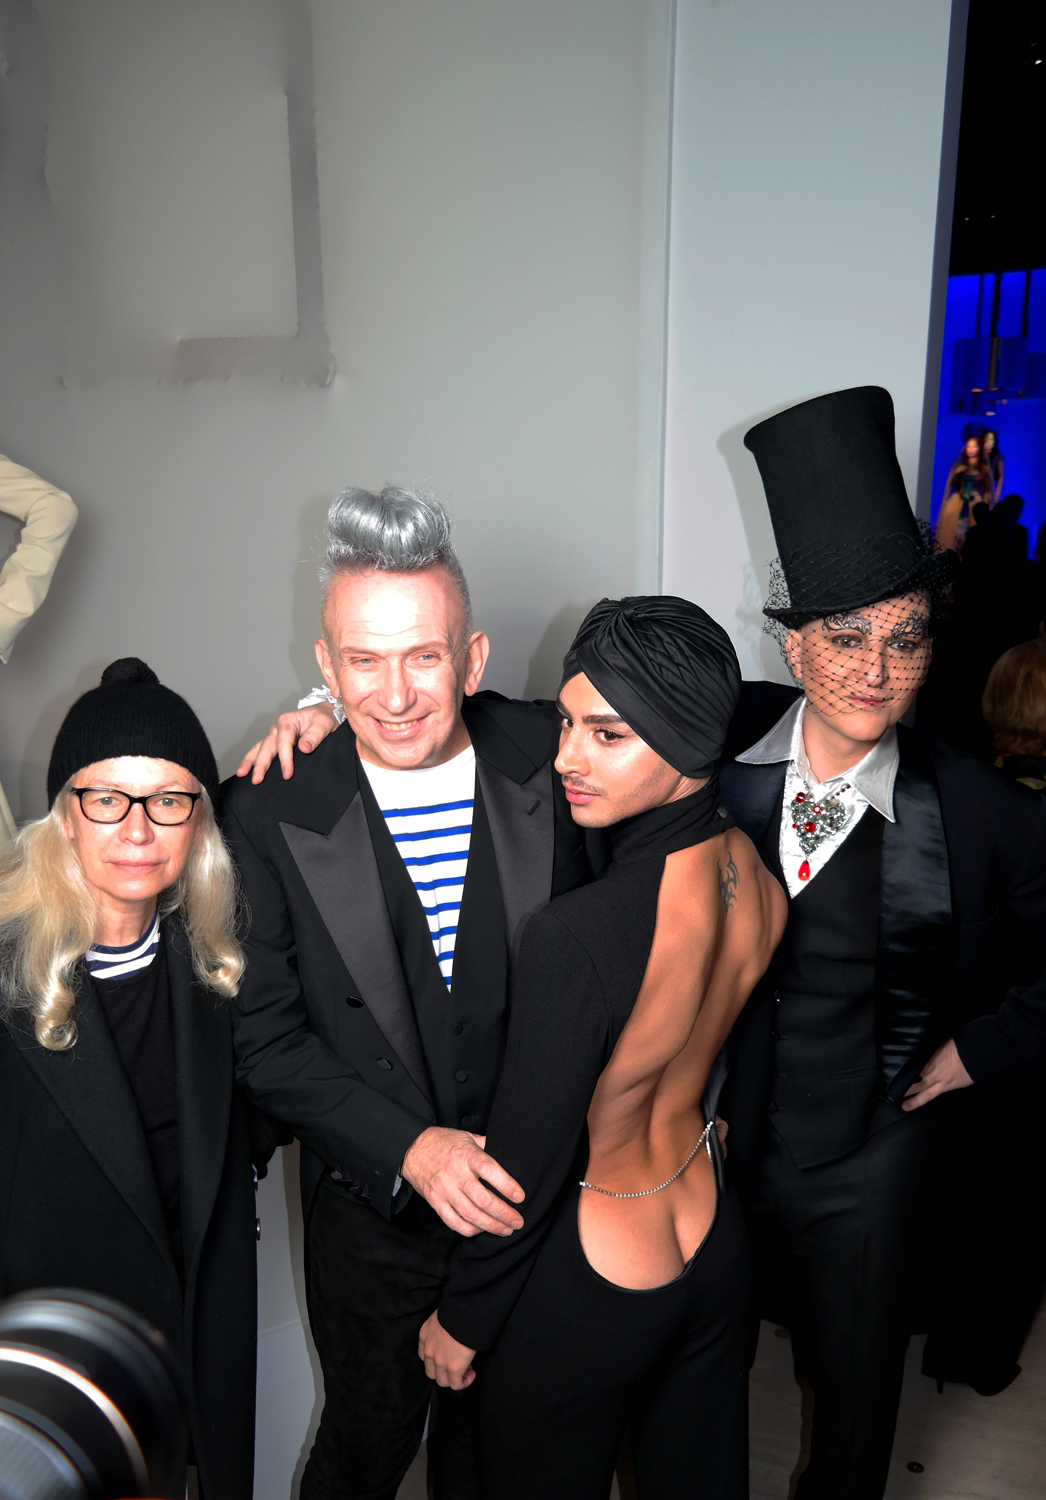 Jean-Paul-Gauthier-Ali-Mahdavi-vernissage-vip-exposition-Grand-palais-fashion-couture-sexy-photo-by-United-States-of-Paris-blog